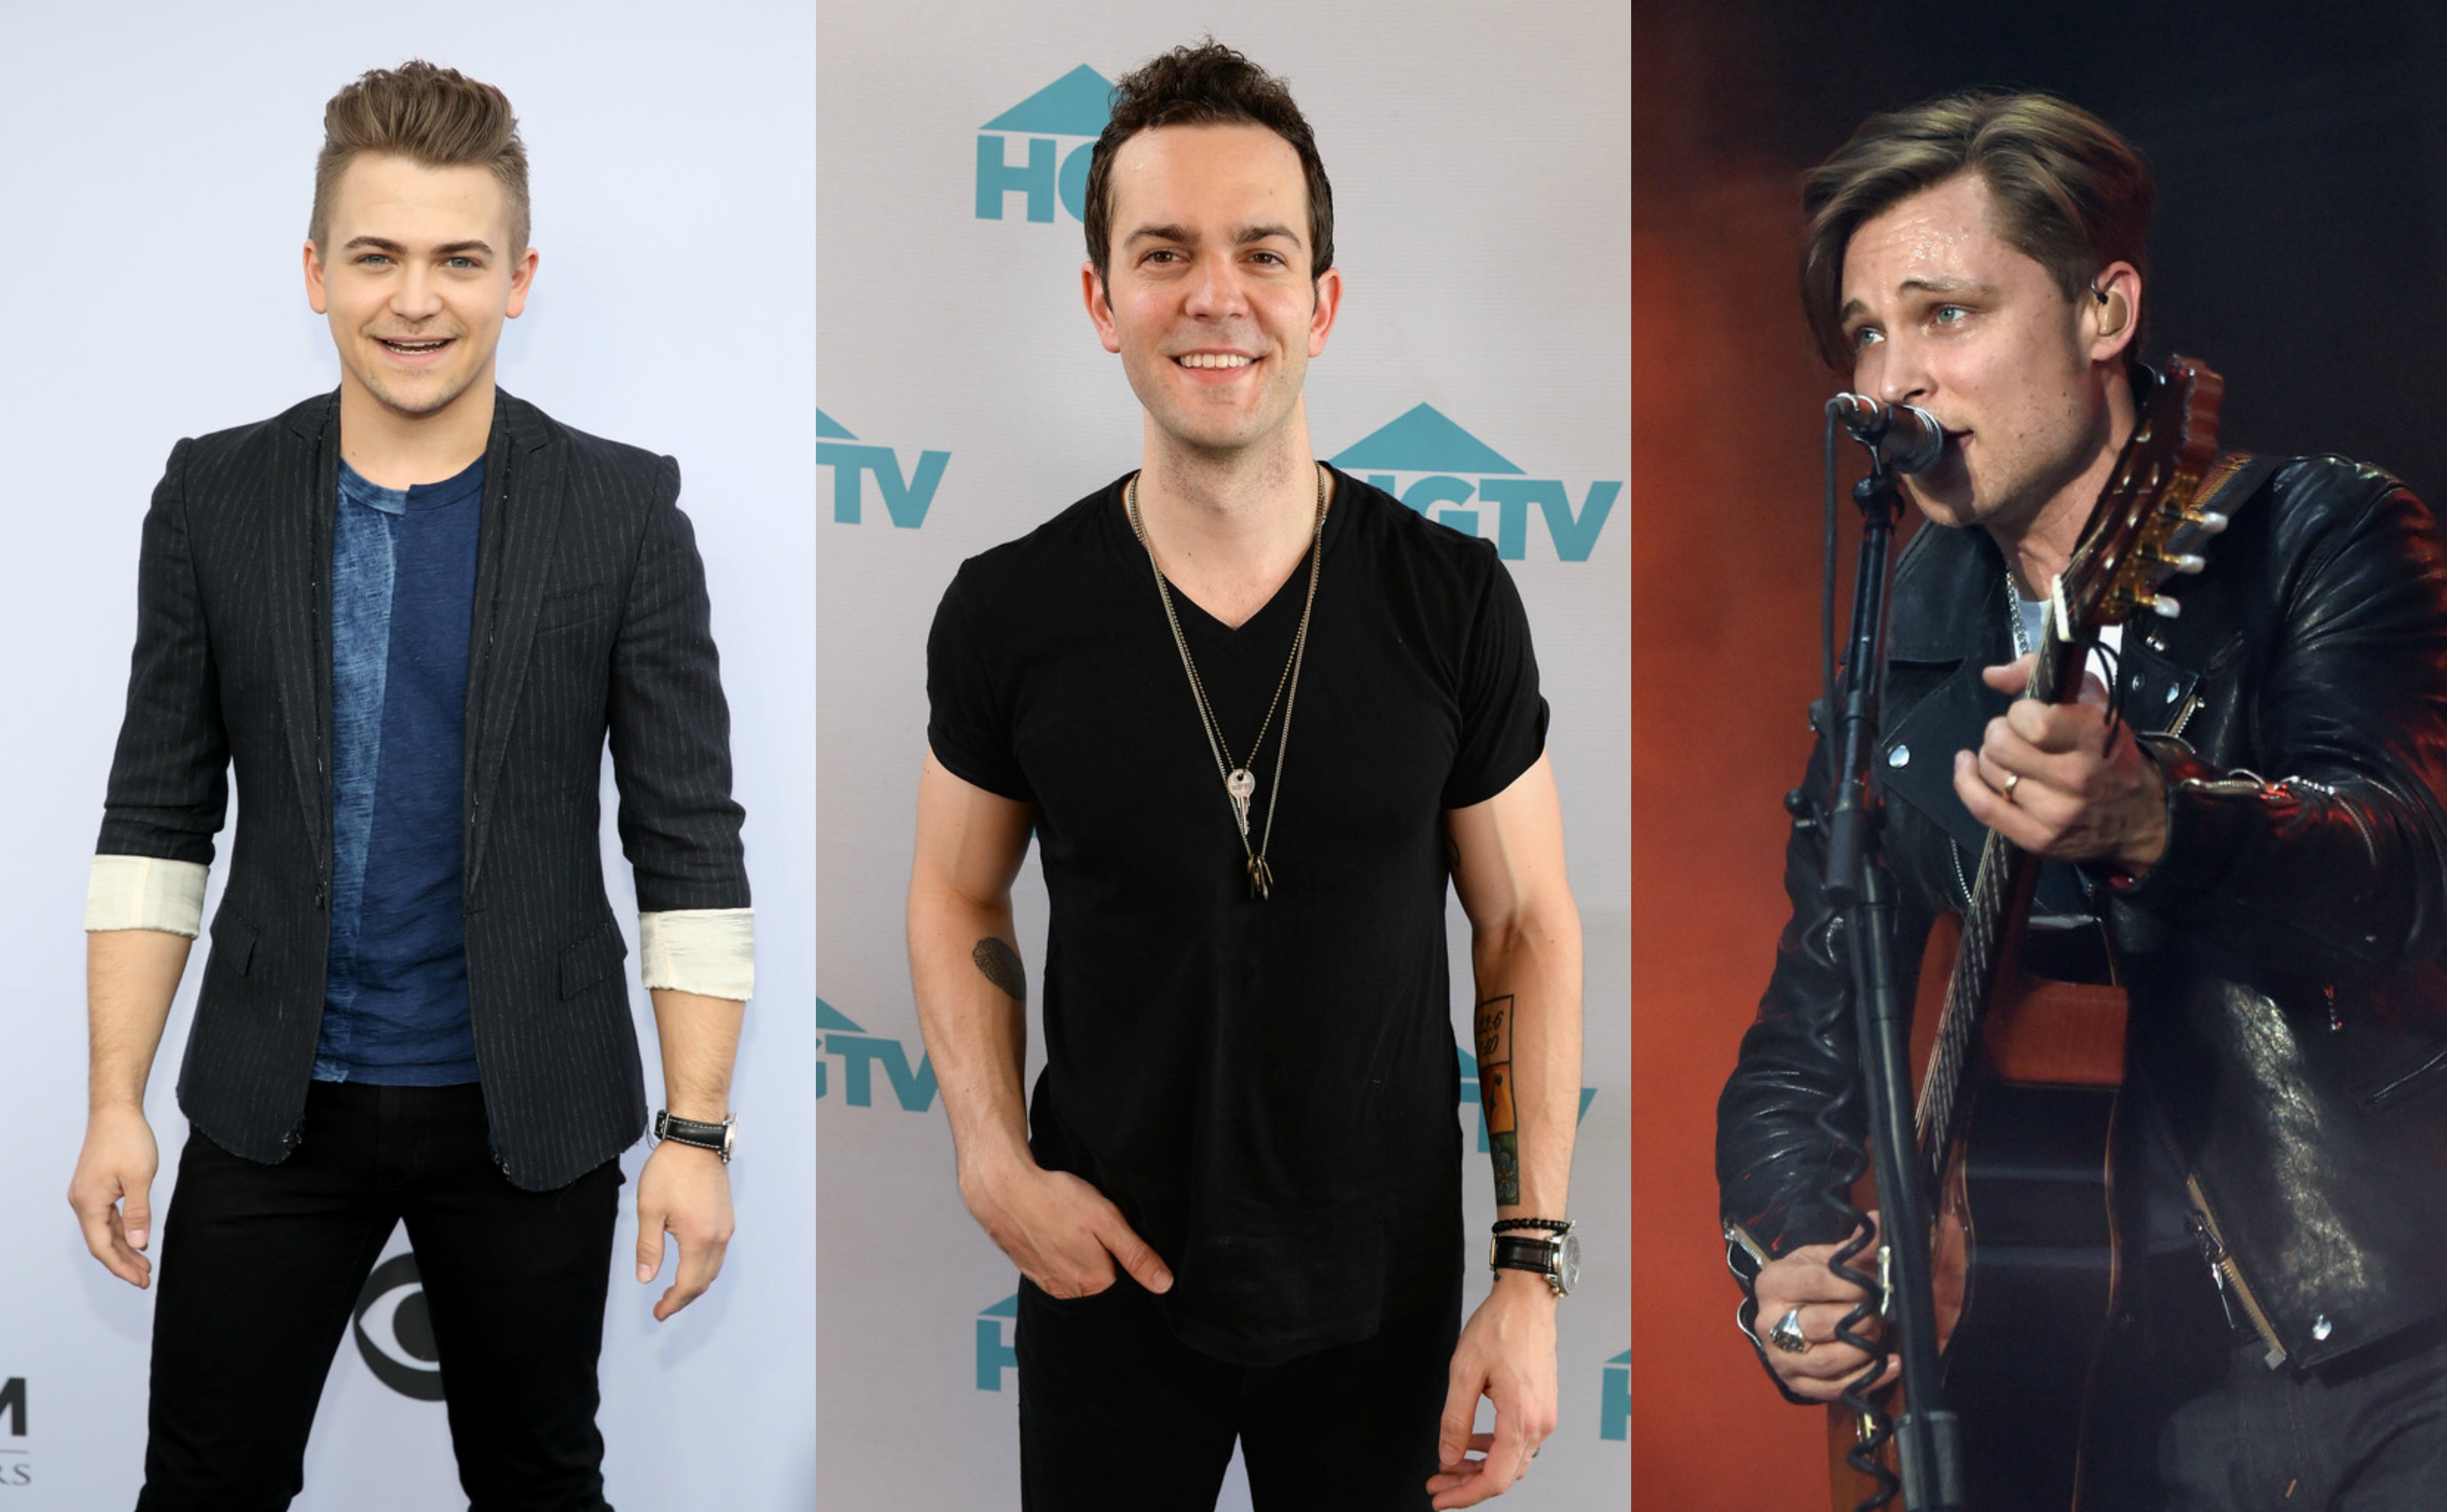 Hunter Hayes, Frankie Ballard, & Ryan Kinder Will Perform at Special Concert for Hurricane Victims